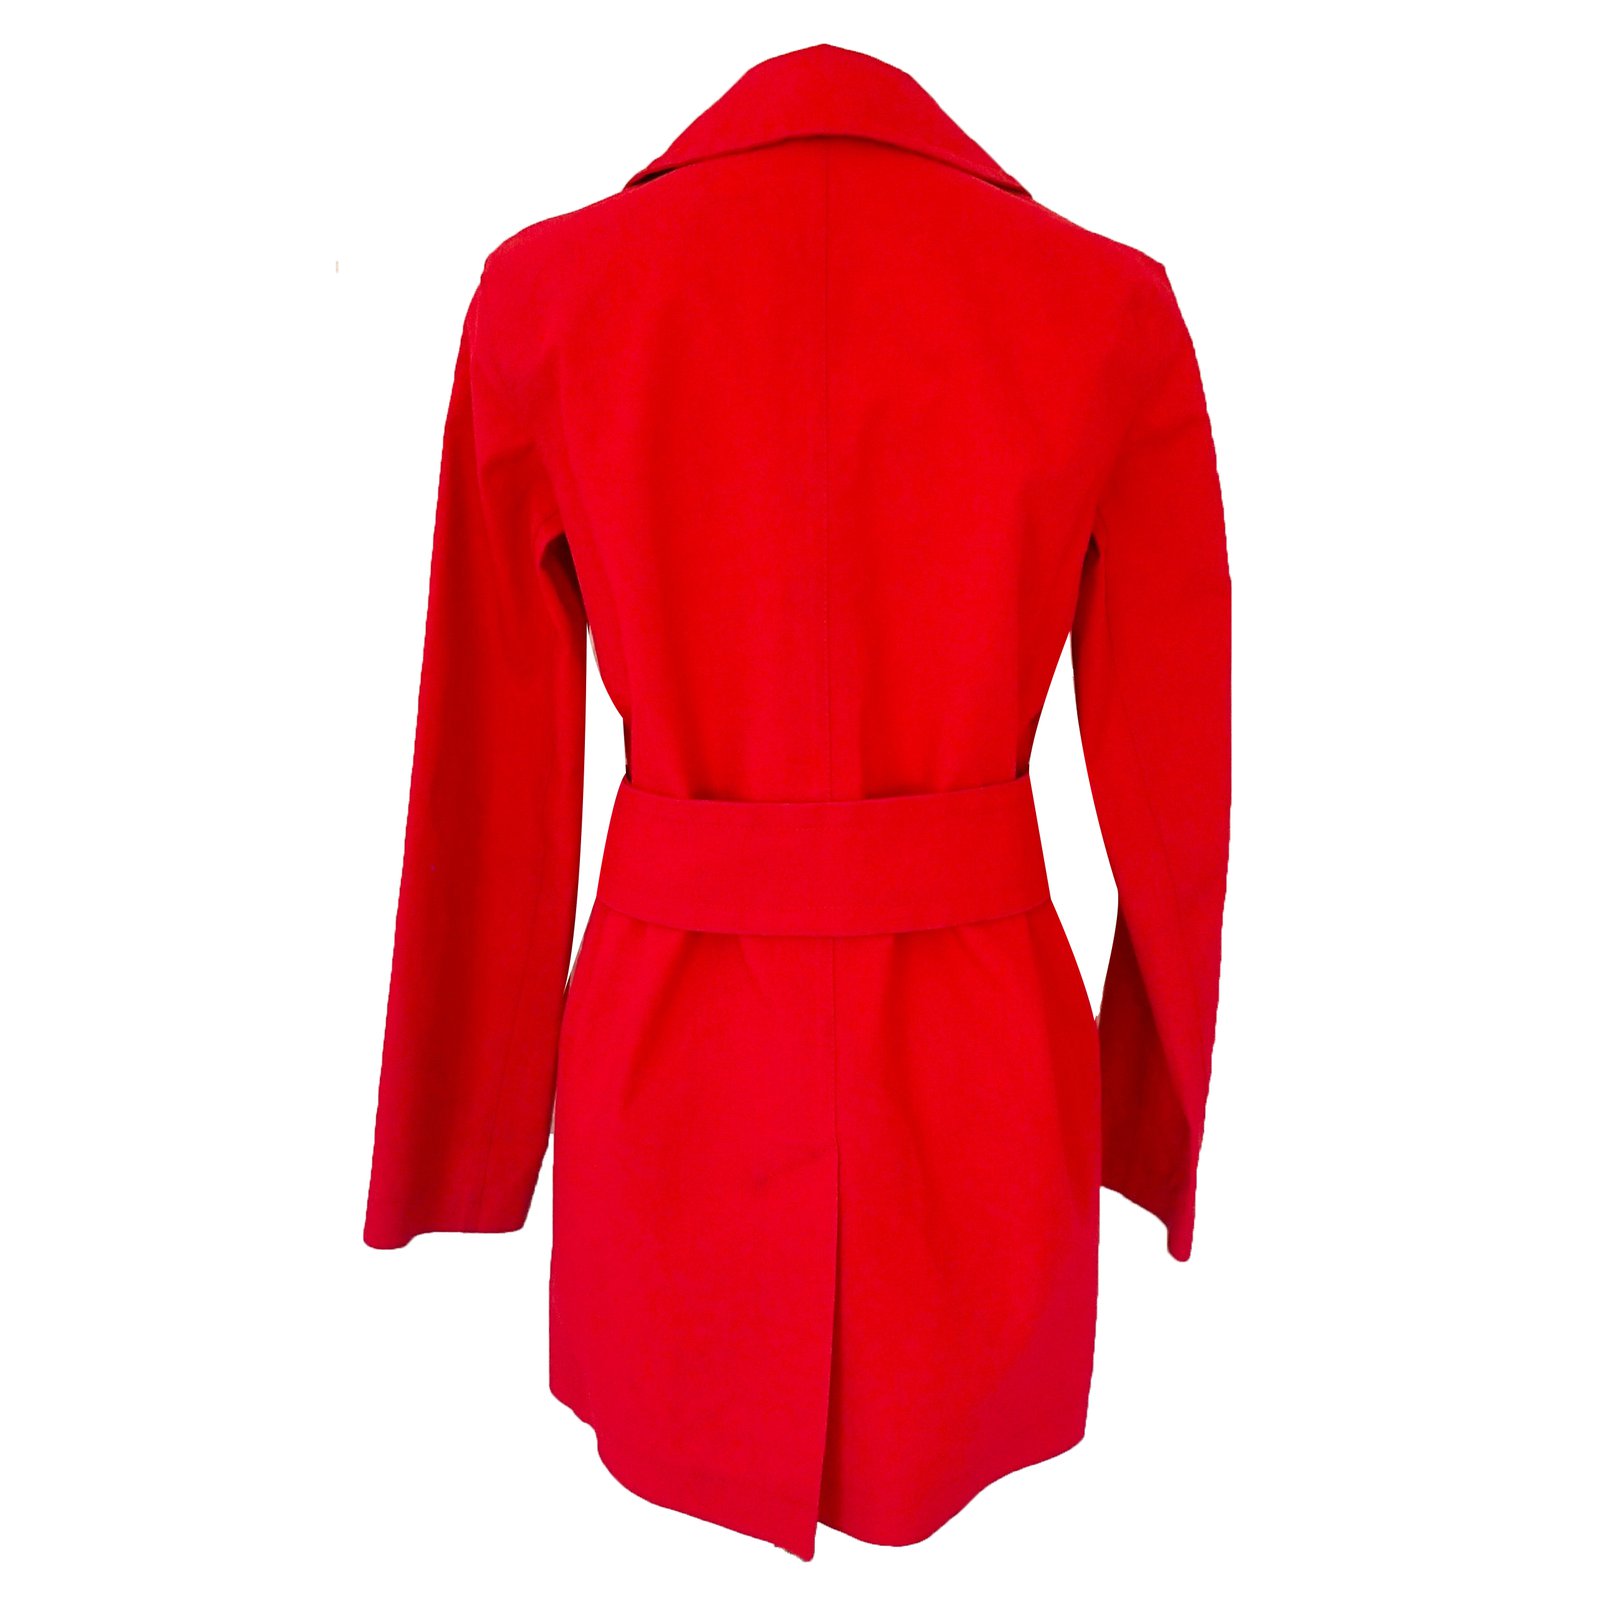 LOUIS VUITTON MACKINTOSH Trench Coat 36 Red Authentic Women Used